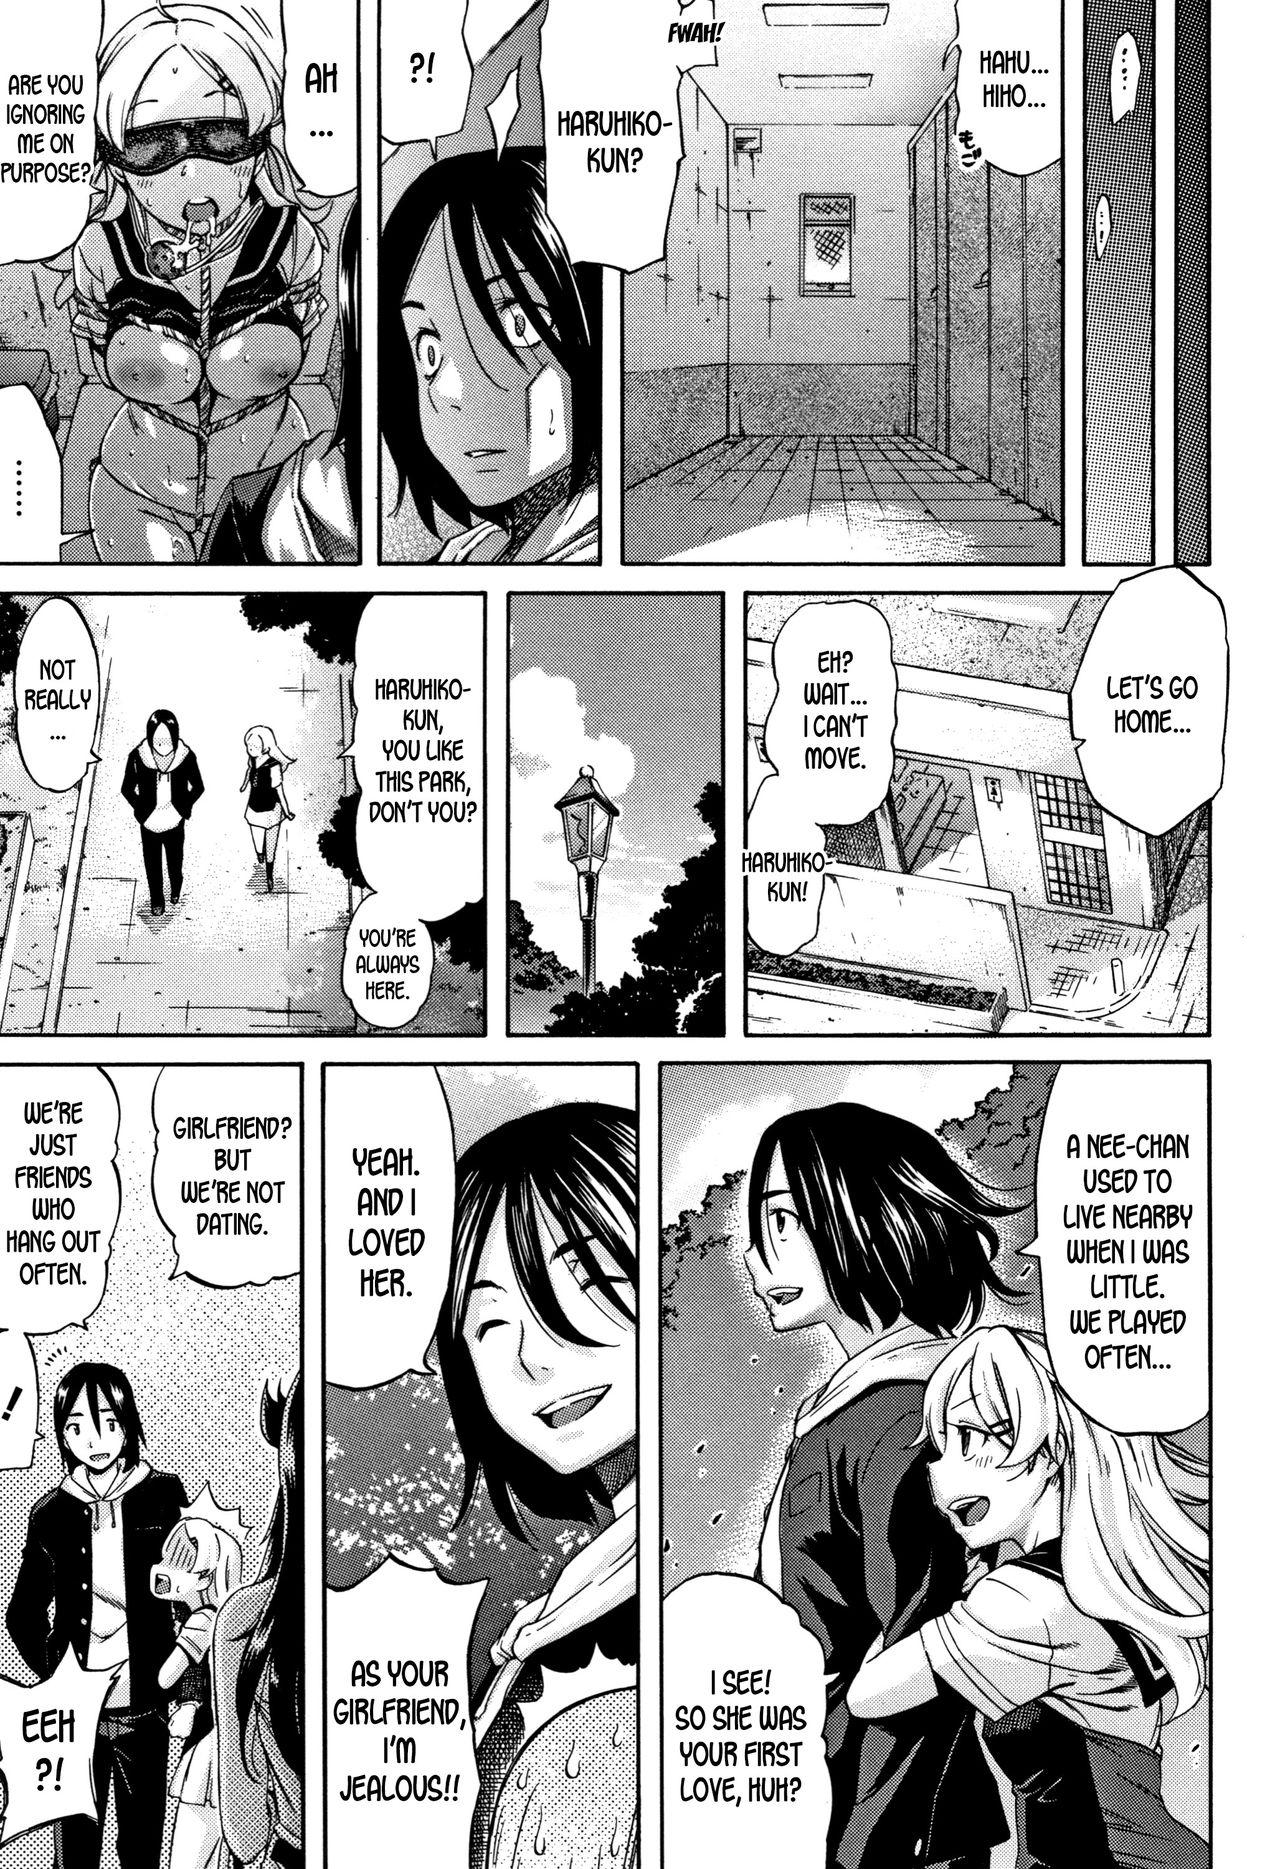 Mexico Anokoro no Toki no Naka de | At That Moment in Time Longhair - Page 9